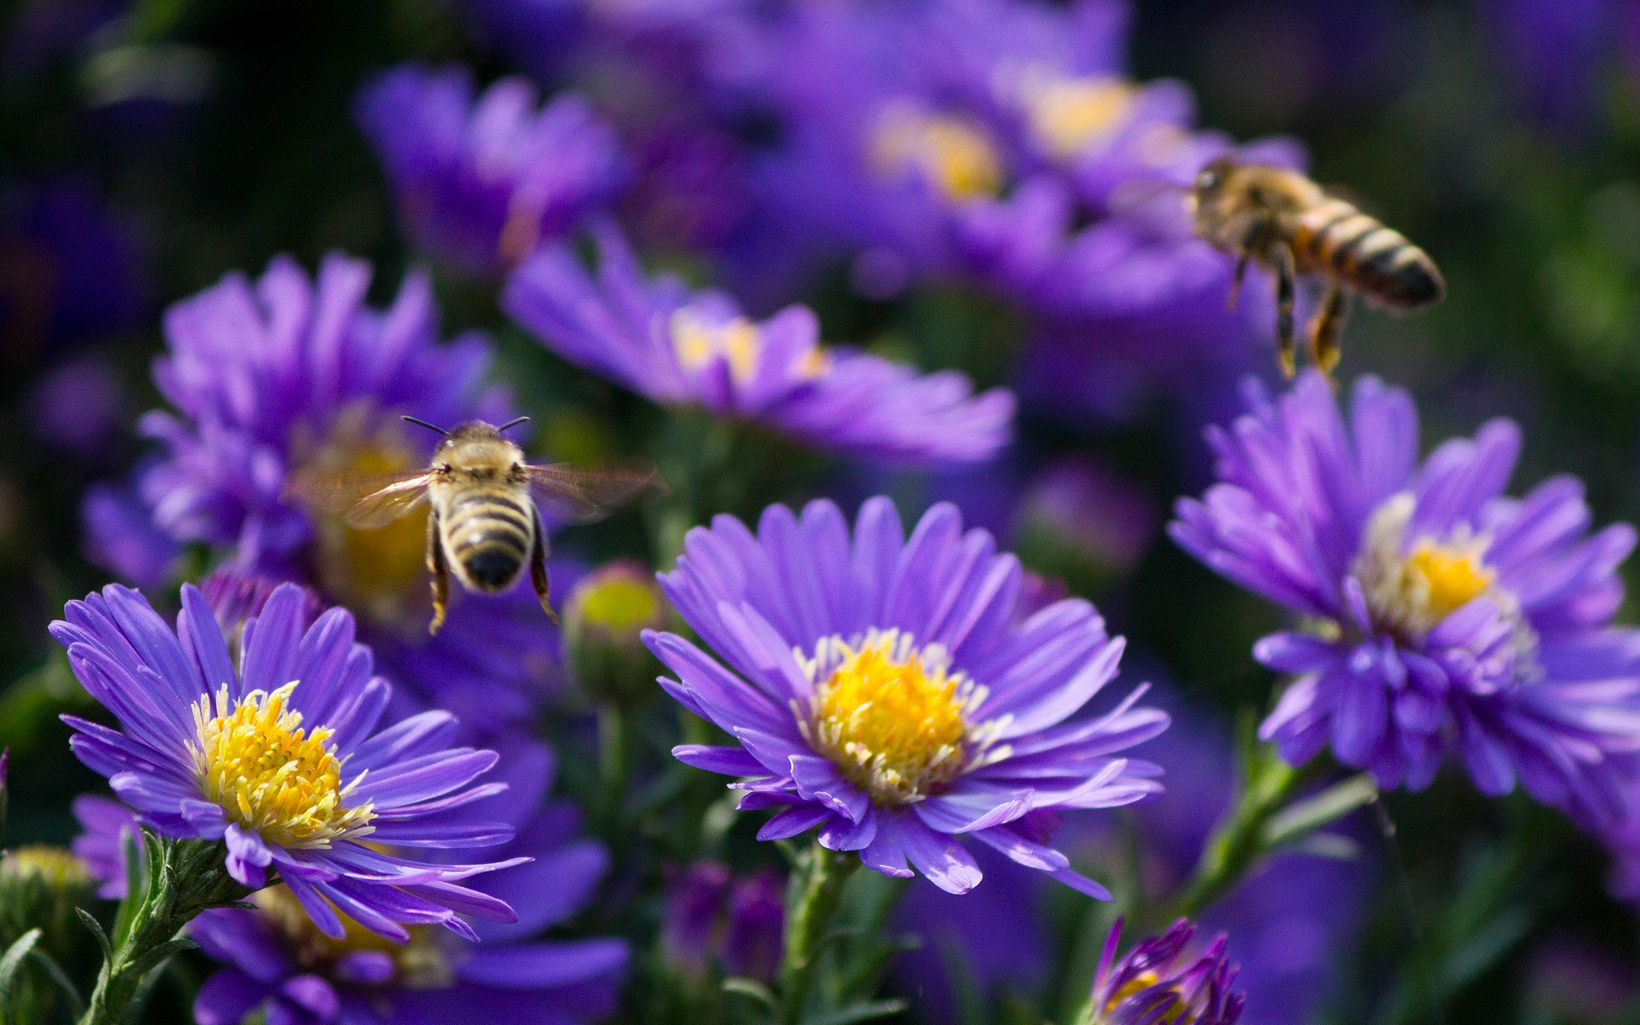 two bees flying above purple and yellow flowers